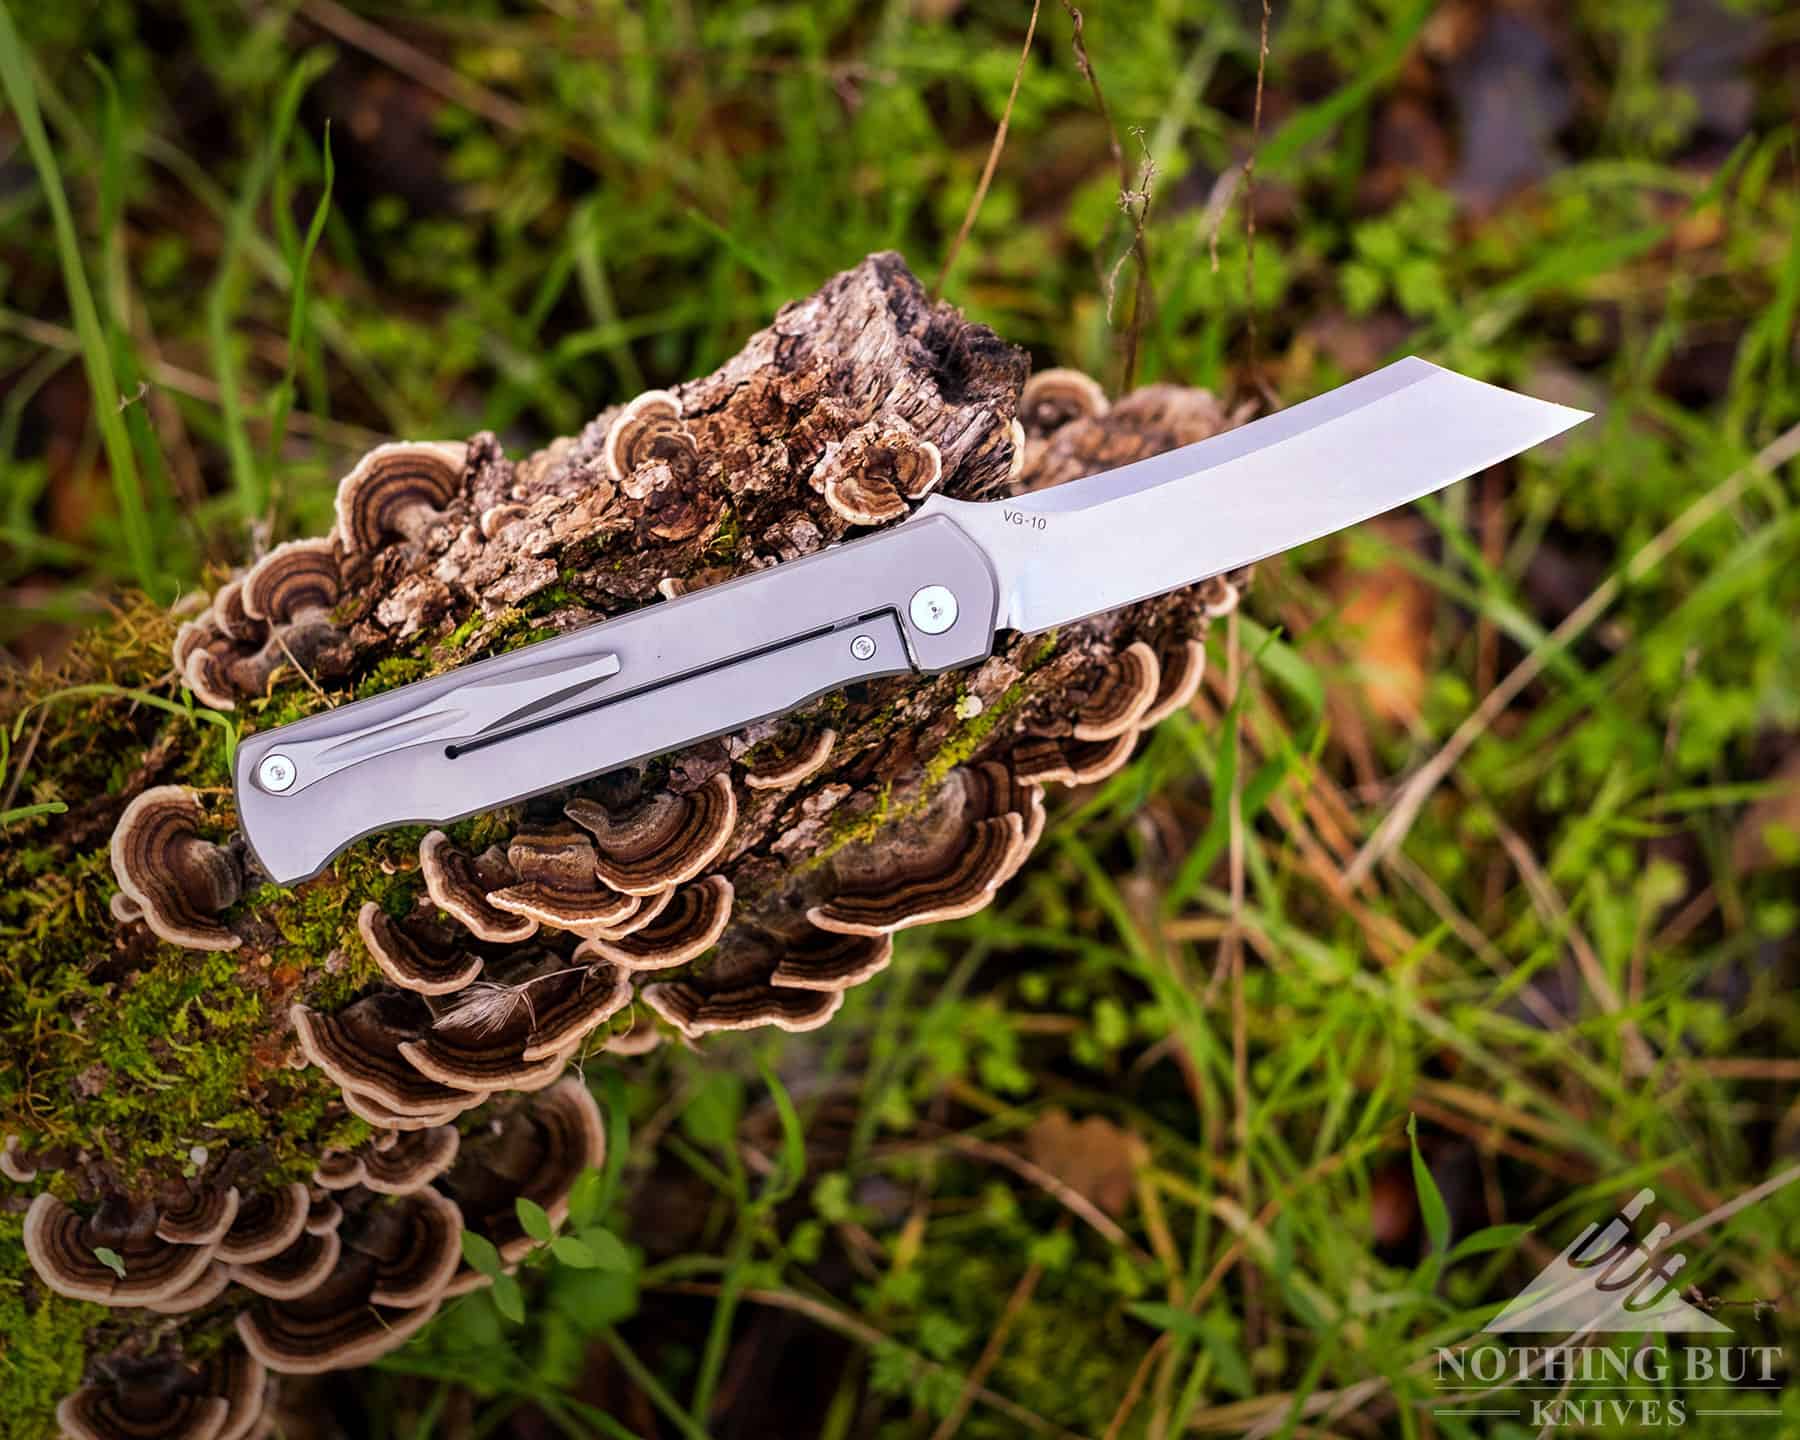 The VG10 steel blade of the Katsu JT01 pocket knife has good heat treatment and blade geometry. 